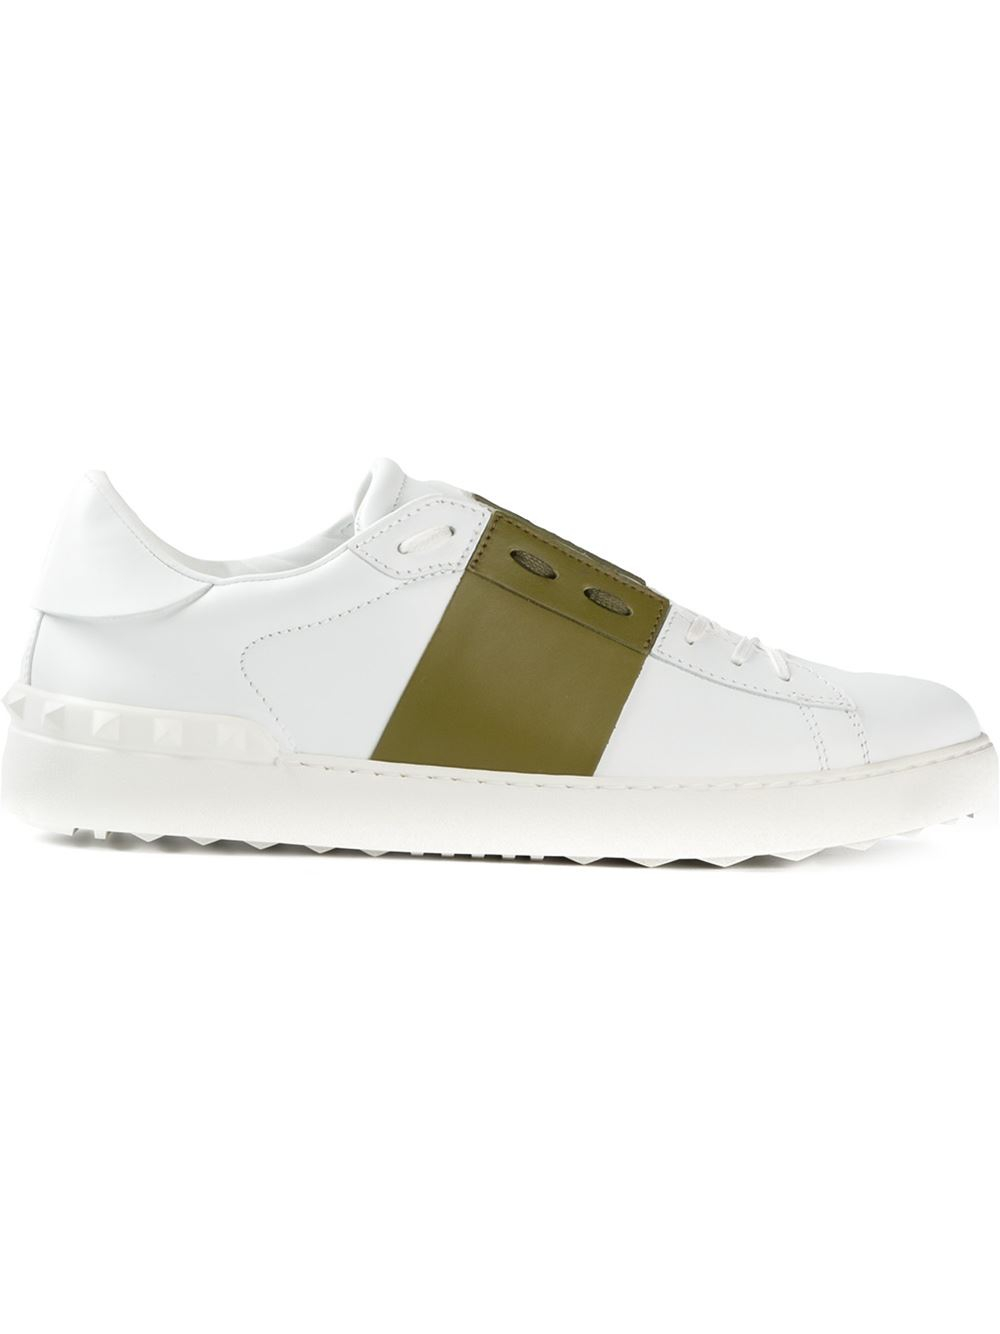 Lyst - Valentino 'Rockrunner' Sneakers in White